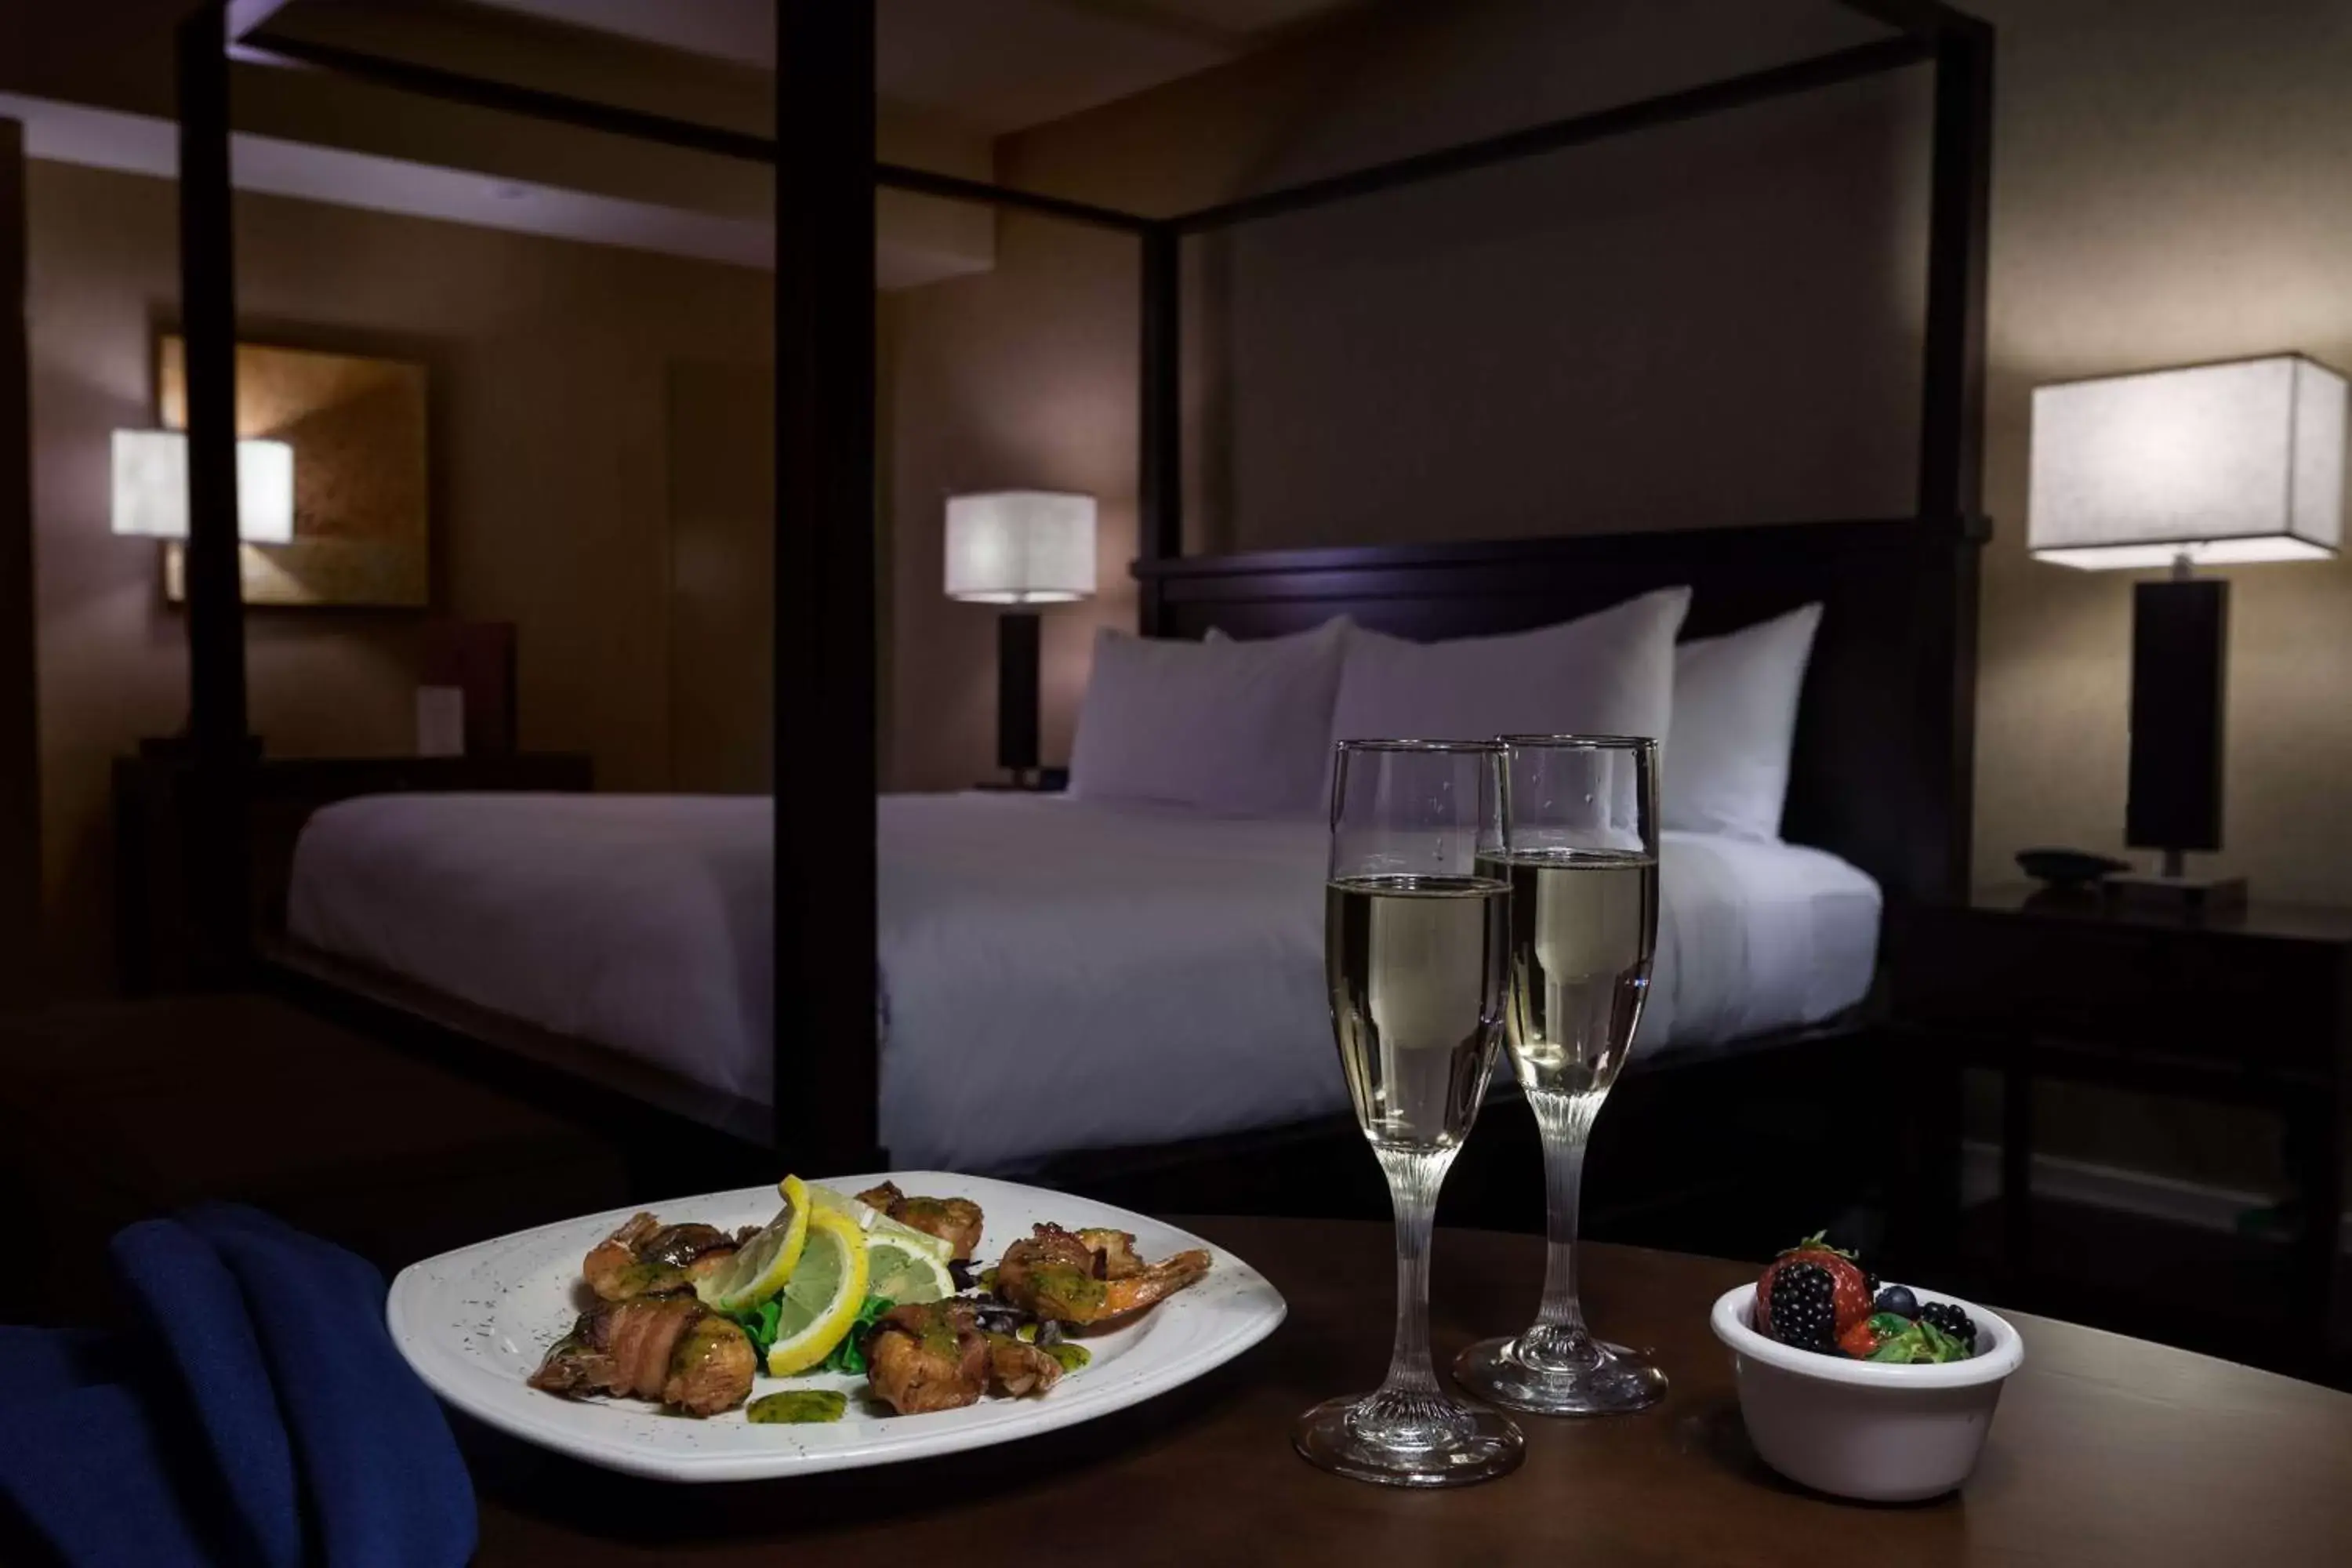 Bed, Lunch and Dinner in Doubletree By Hilton Billings